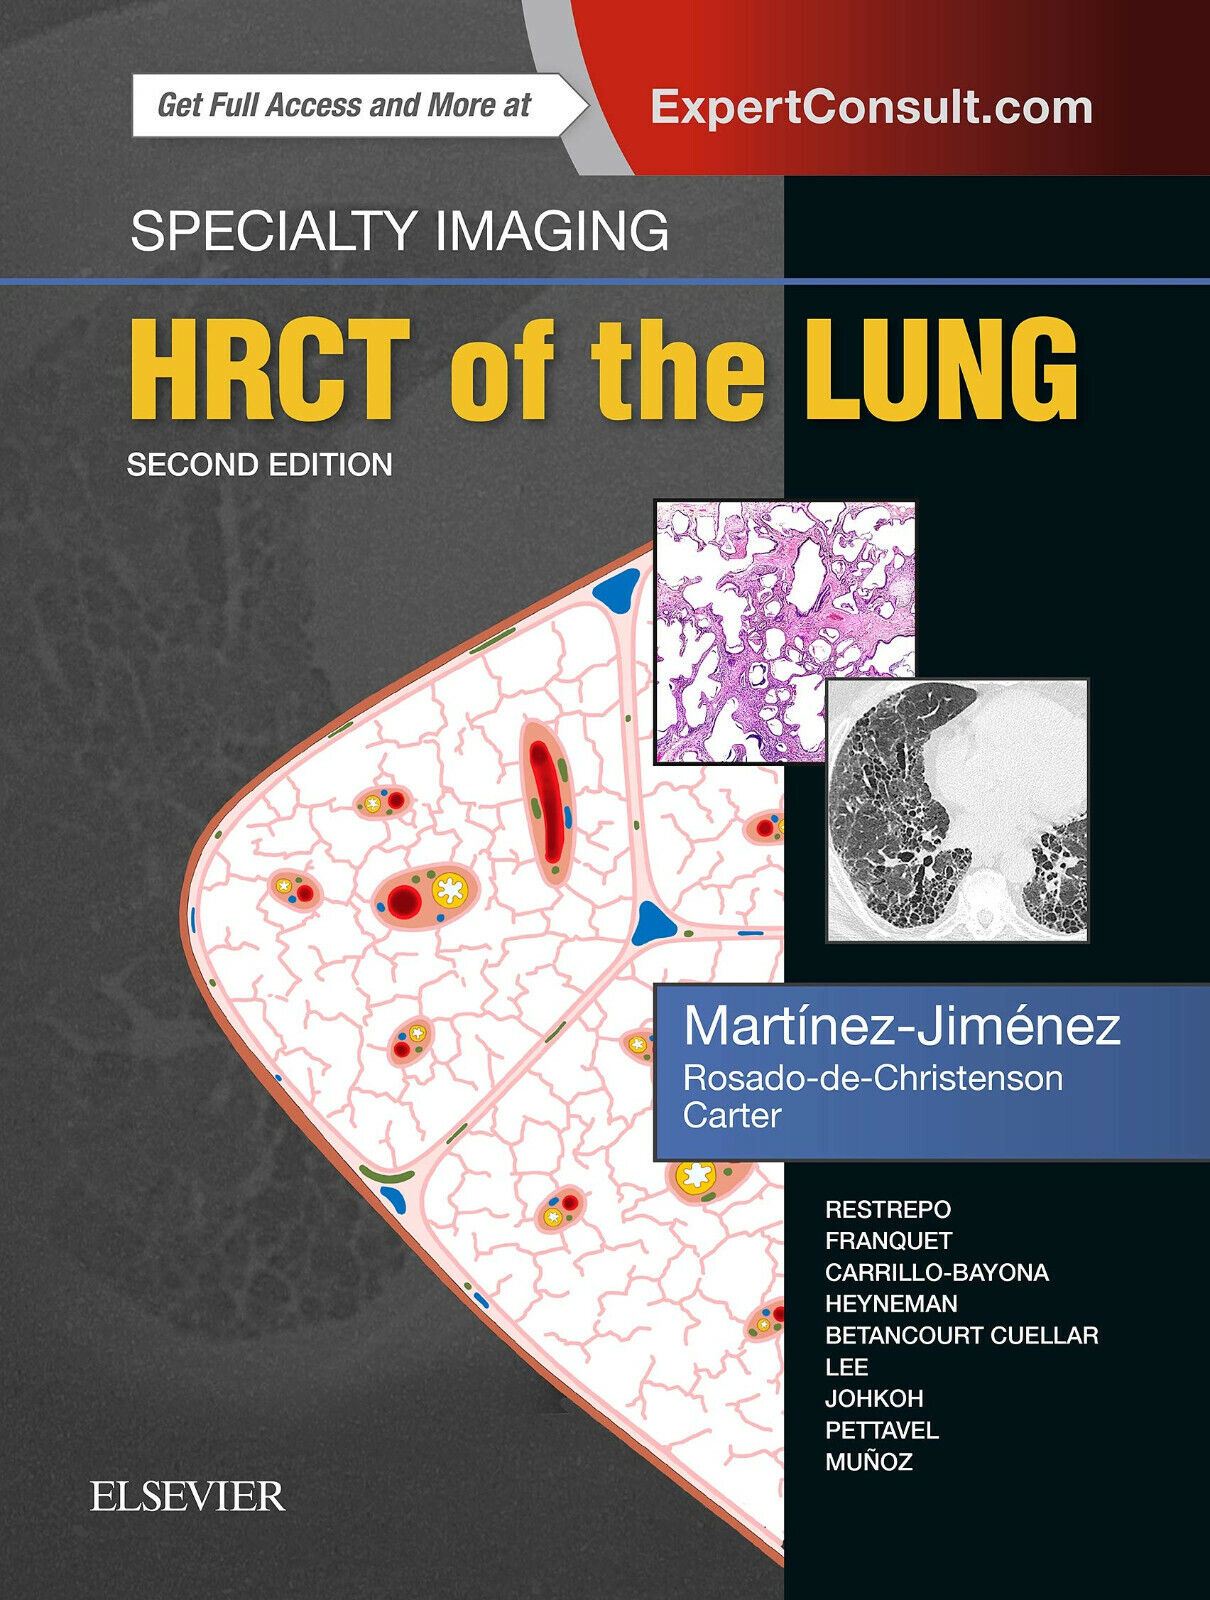 Specialty Imaging: HRCT of the Lung - Elsevier, 2017